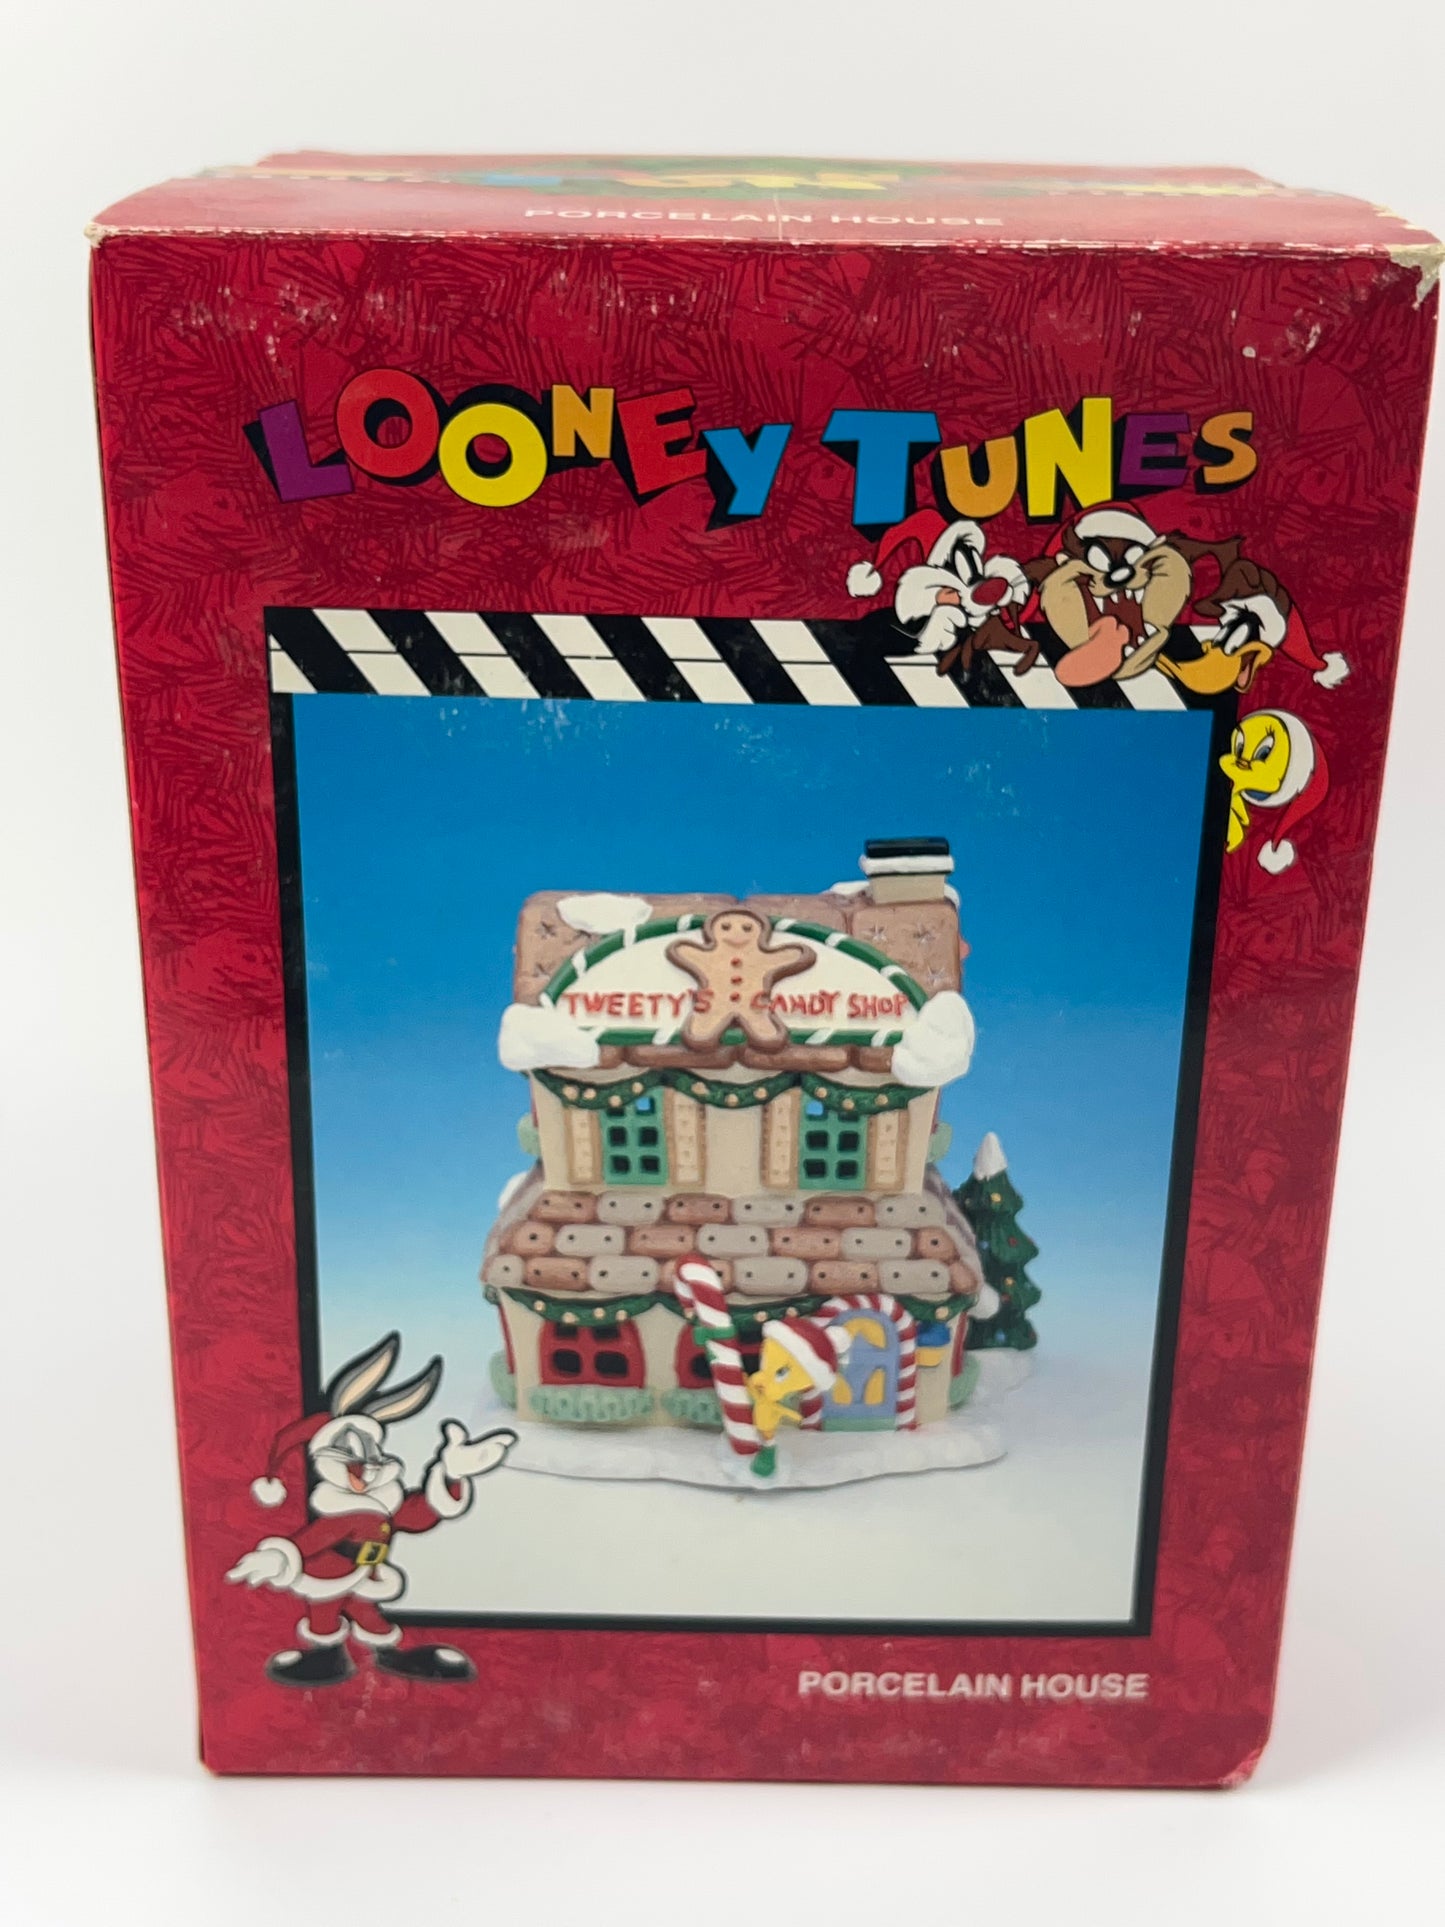 Looney Tunes 1996 Candy Shop de Tweety Lighted Porcelain House Vtg Christmas